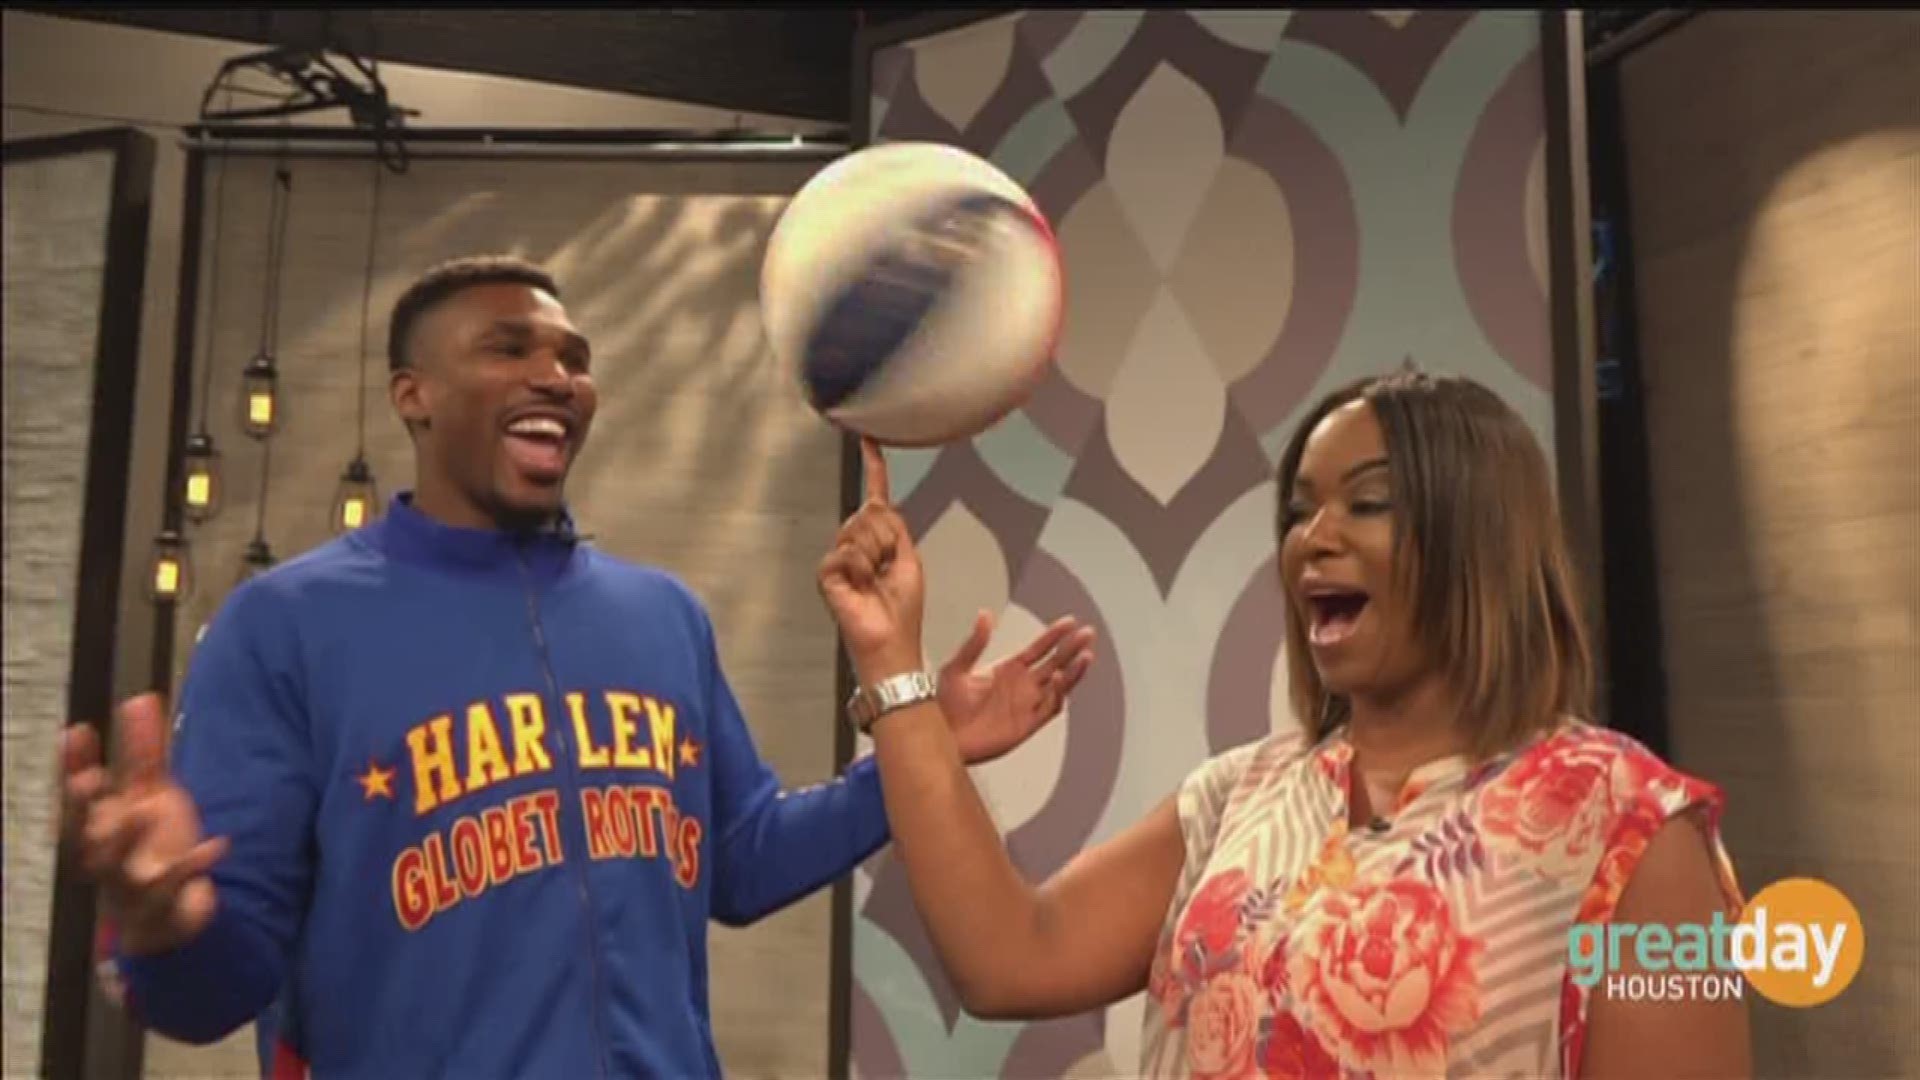 "Thunder Law" of The Harlem Globetrotters stops by to give us a little spin.